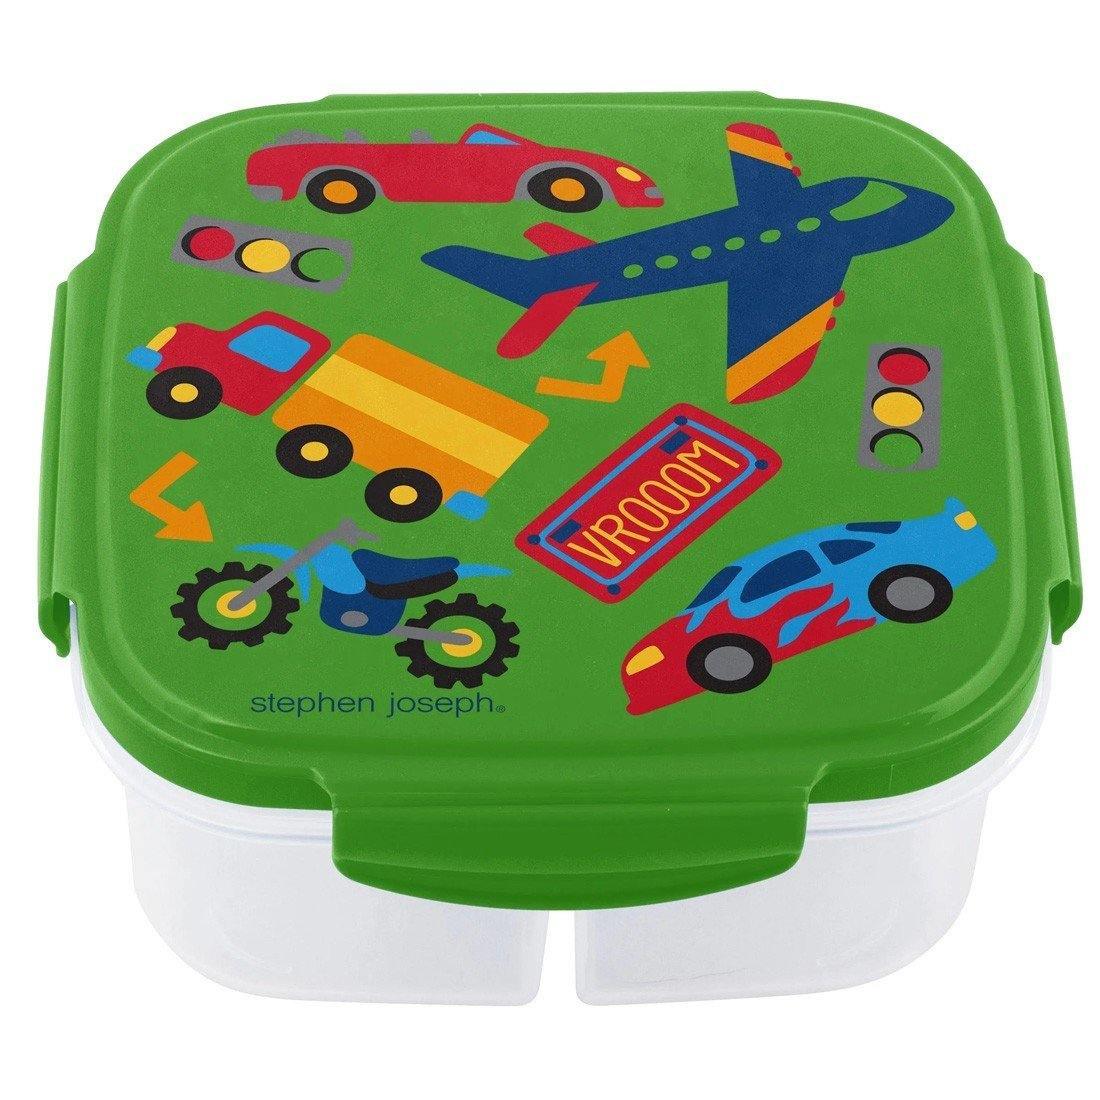 Stephen Joseph Snack Box With Ice Pack Transportation - BumbleToys - 2-4 Years, 5-7 Years, Boys, Cecil, Lunch Box, School Supplies